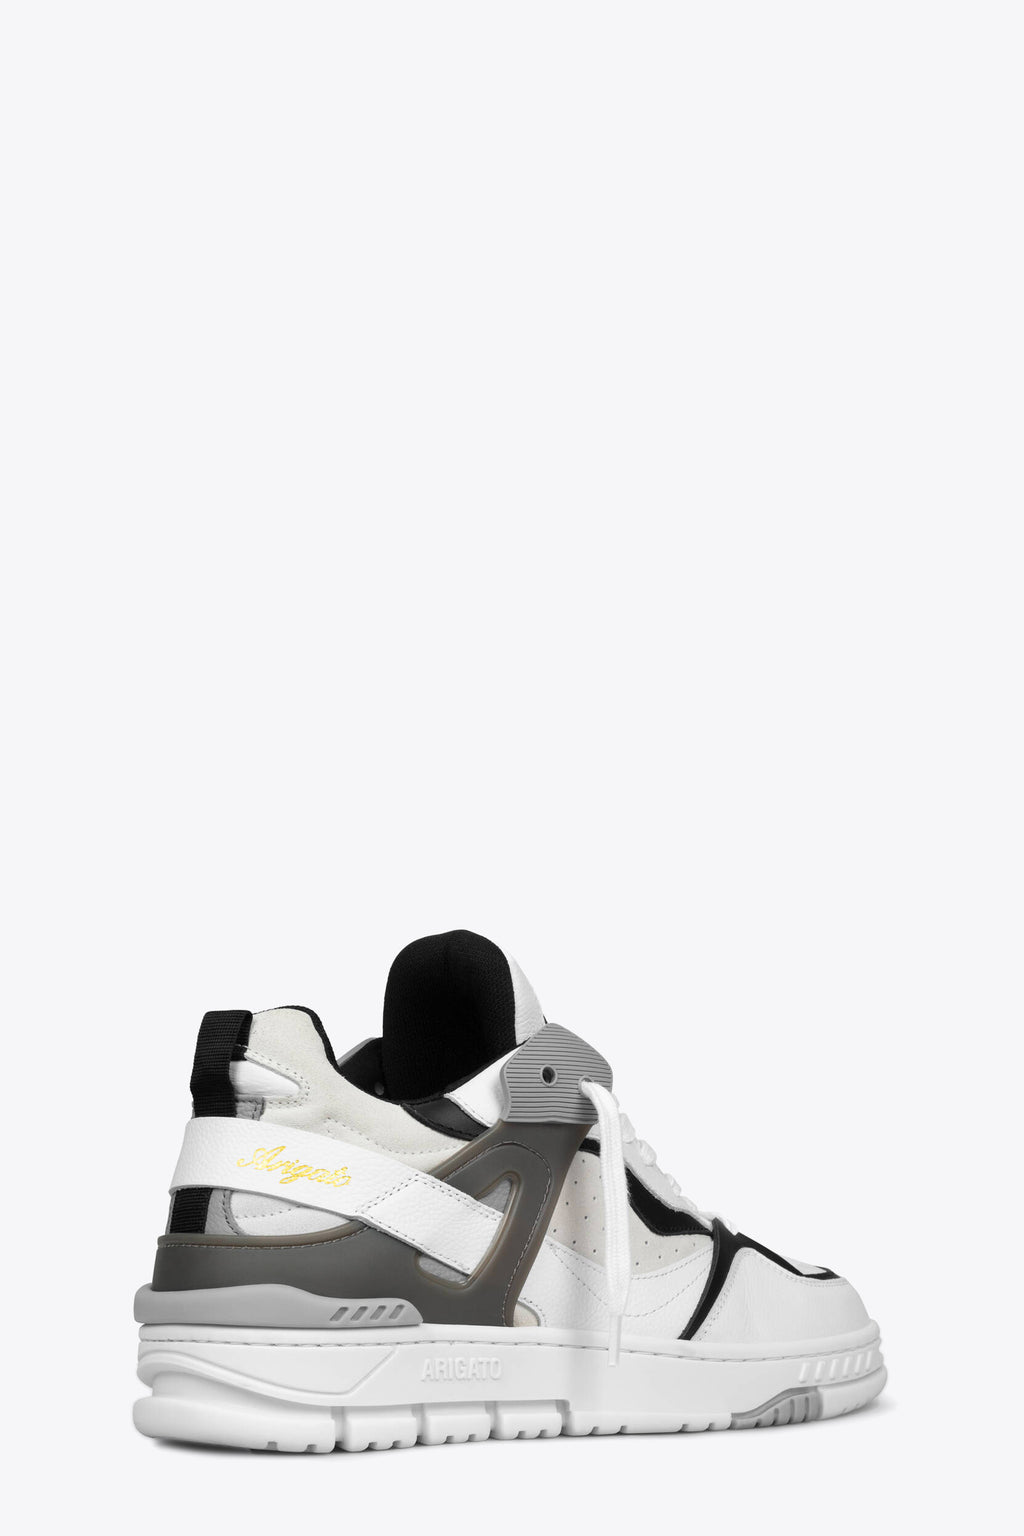 alt-image__White-and-black-leather-90s-style-low-sneaker---Astro-Sneaker-